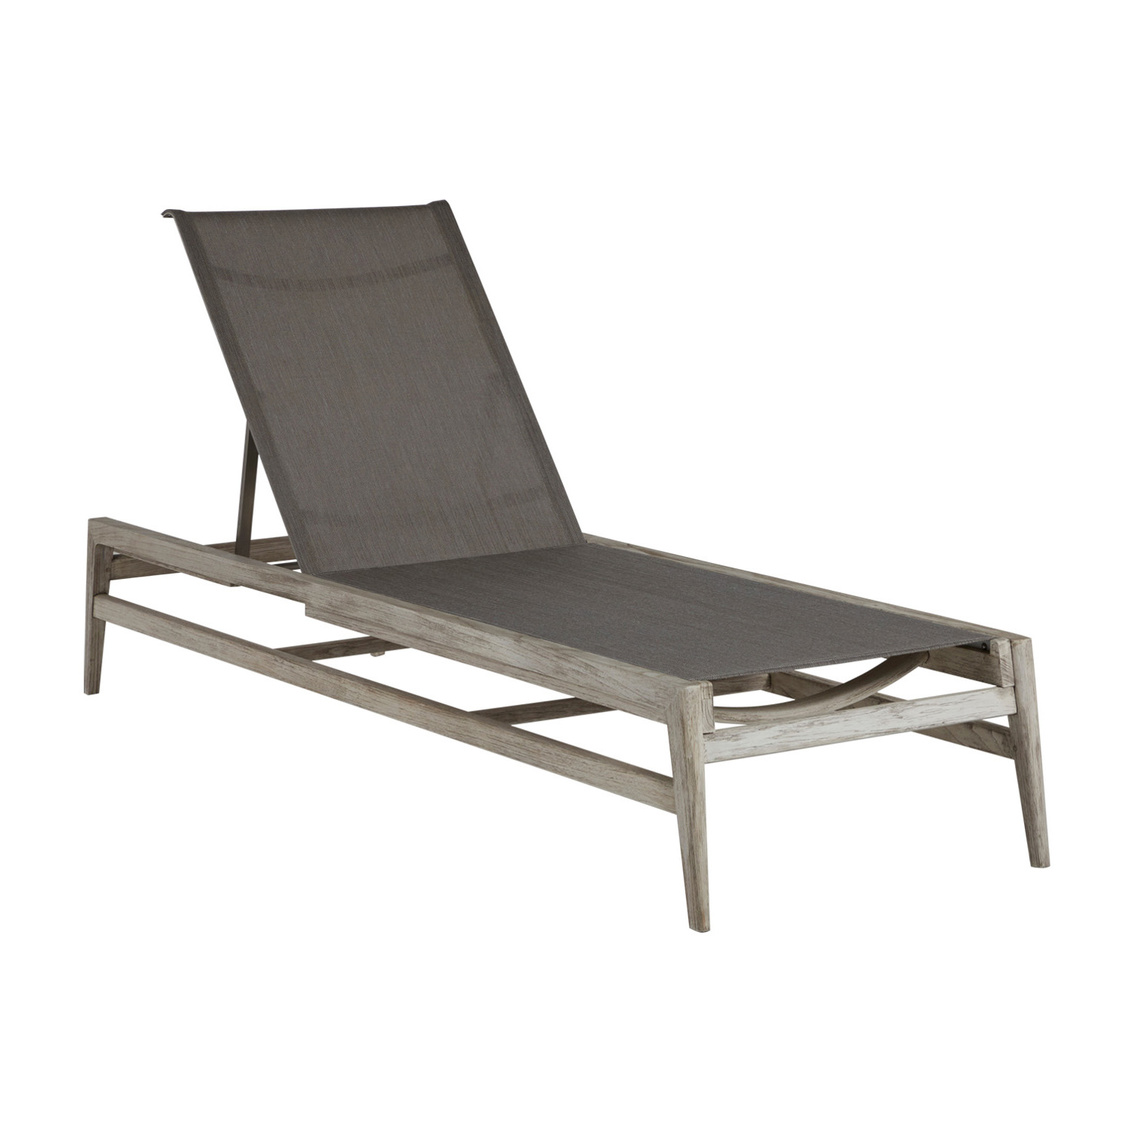 coast teak chaise in oyster teak / heather grey sling product image